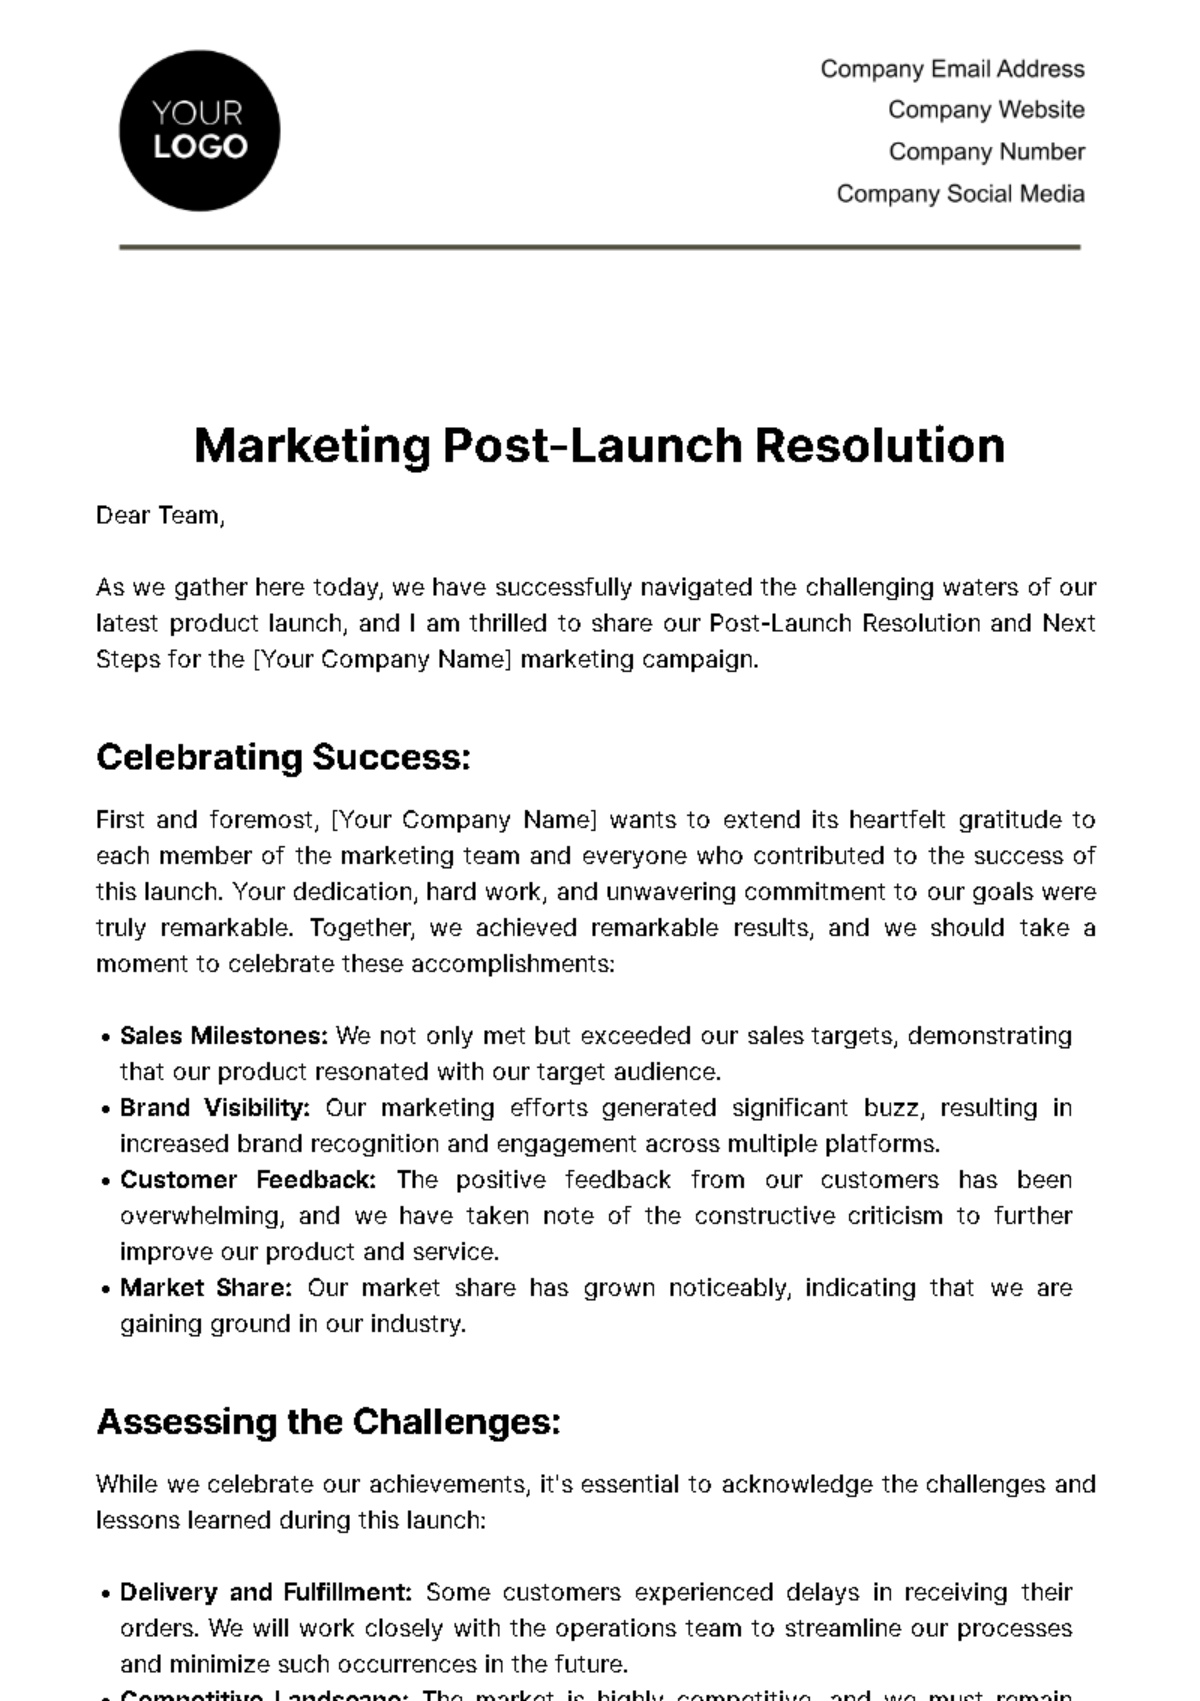 Free Marketing Post-Launch Resolution Template